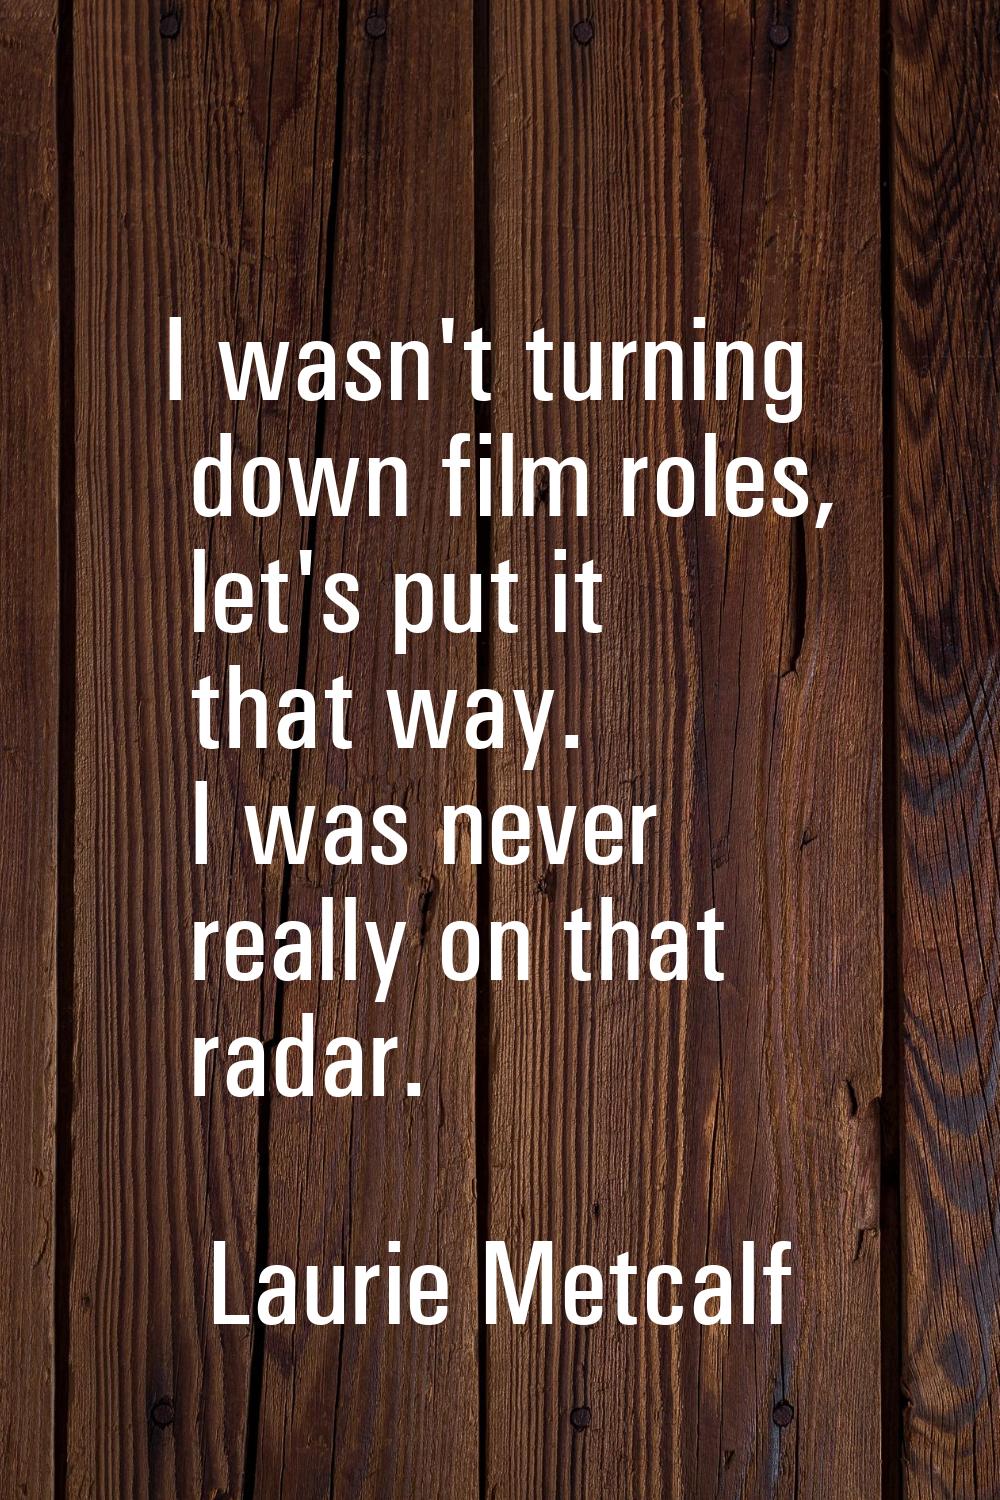 I wasn't turning down film roles, let's put it that way. I was never really on that radar.